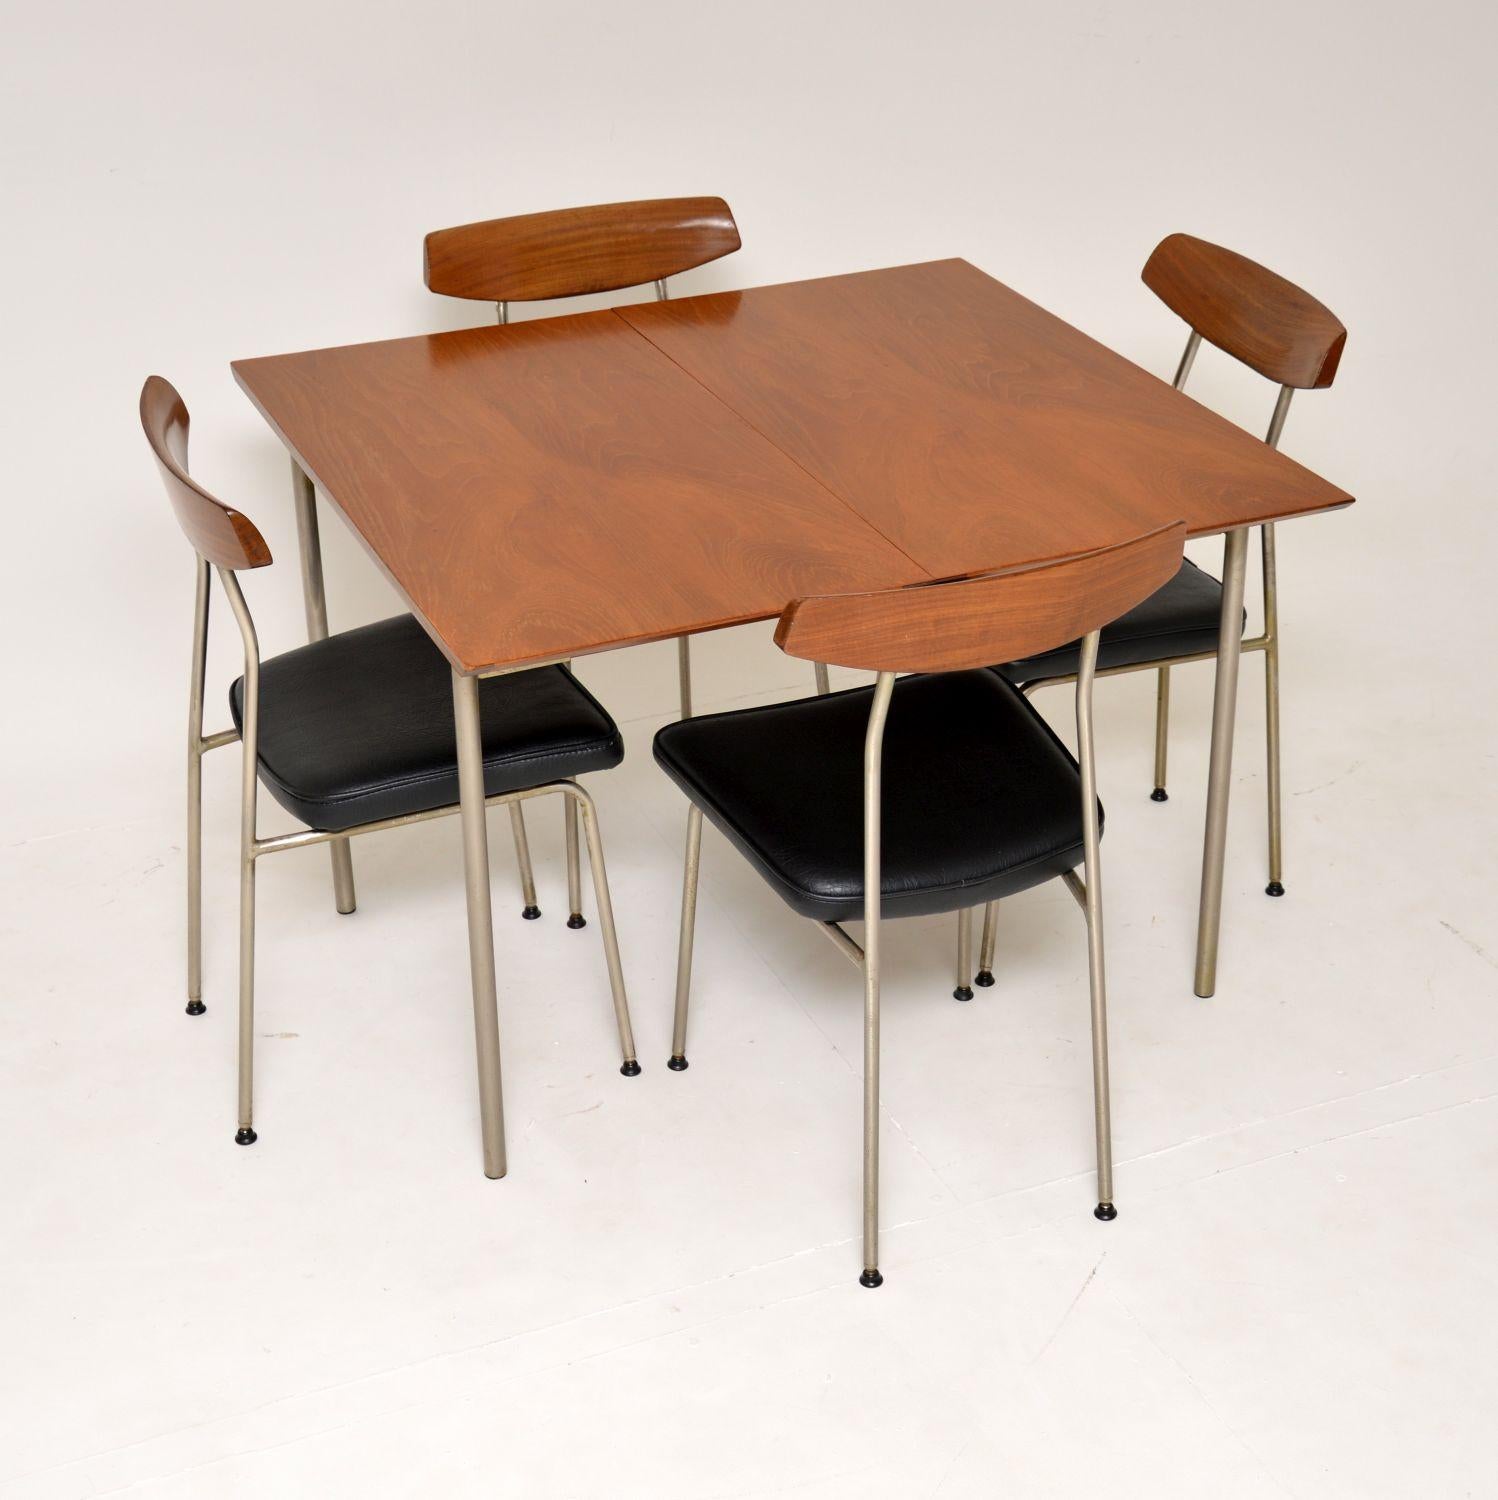 An extremely stylish and iconic design, this dining table and chairs were made in England by Stag in the 1950’s. They are part of the award winning S Range design by husband and wife team John and Sylvia Reid.

The table top is teak and back rests